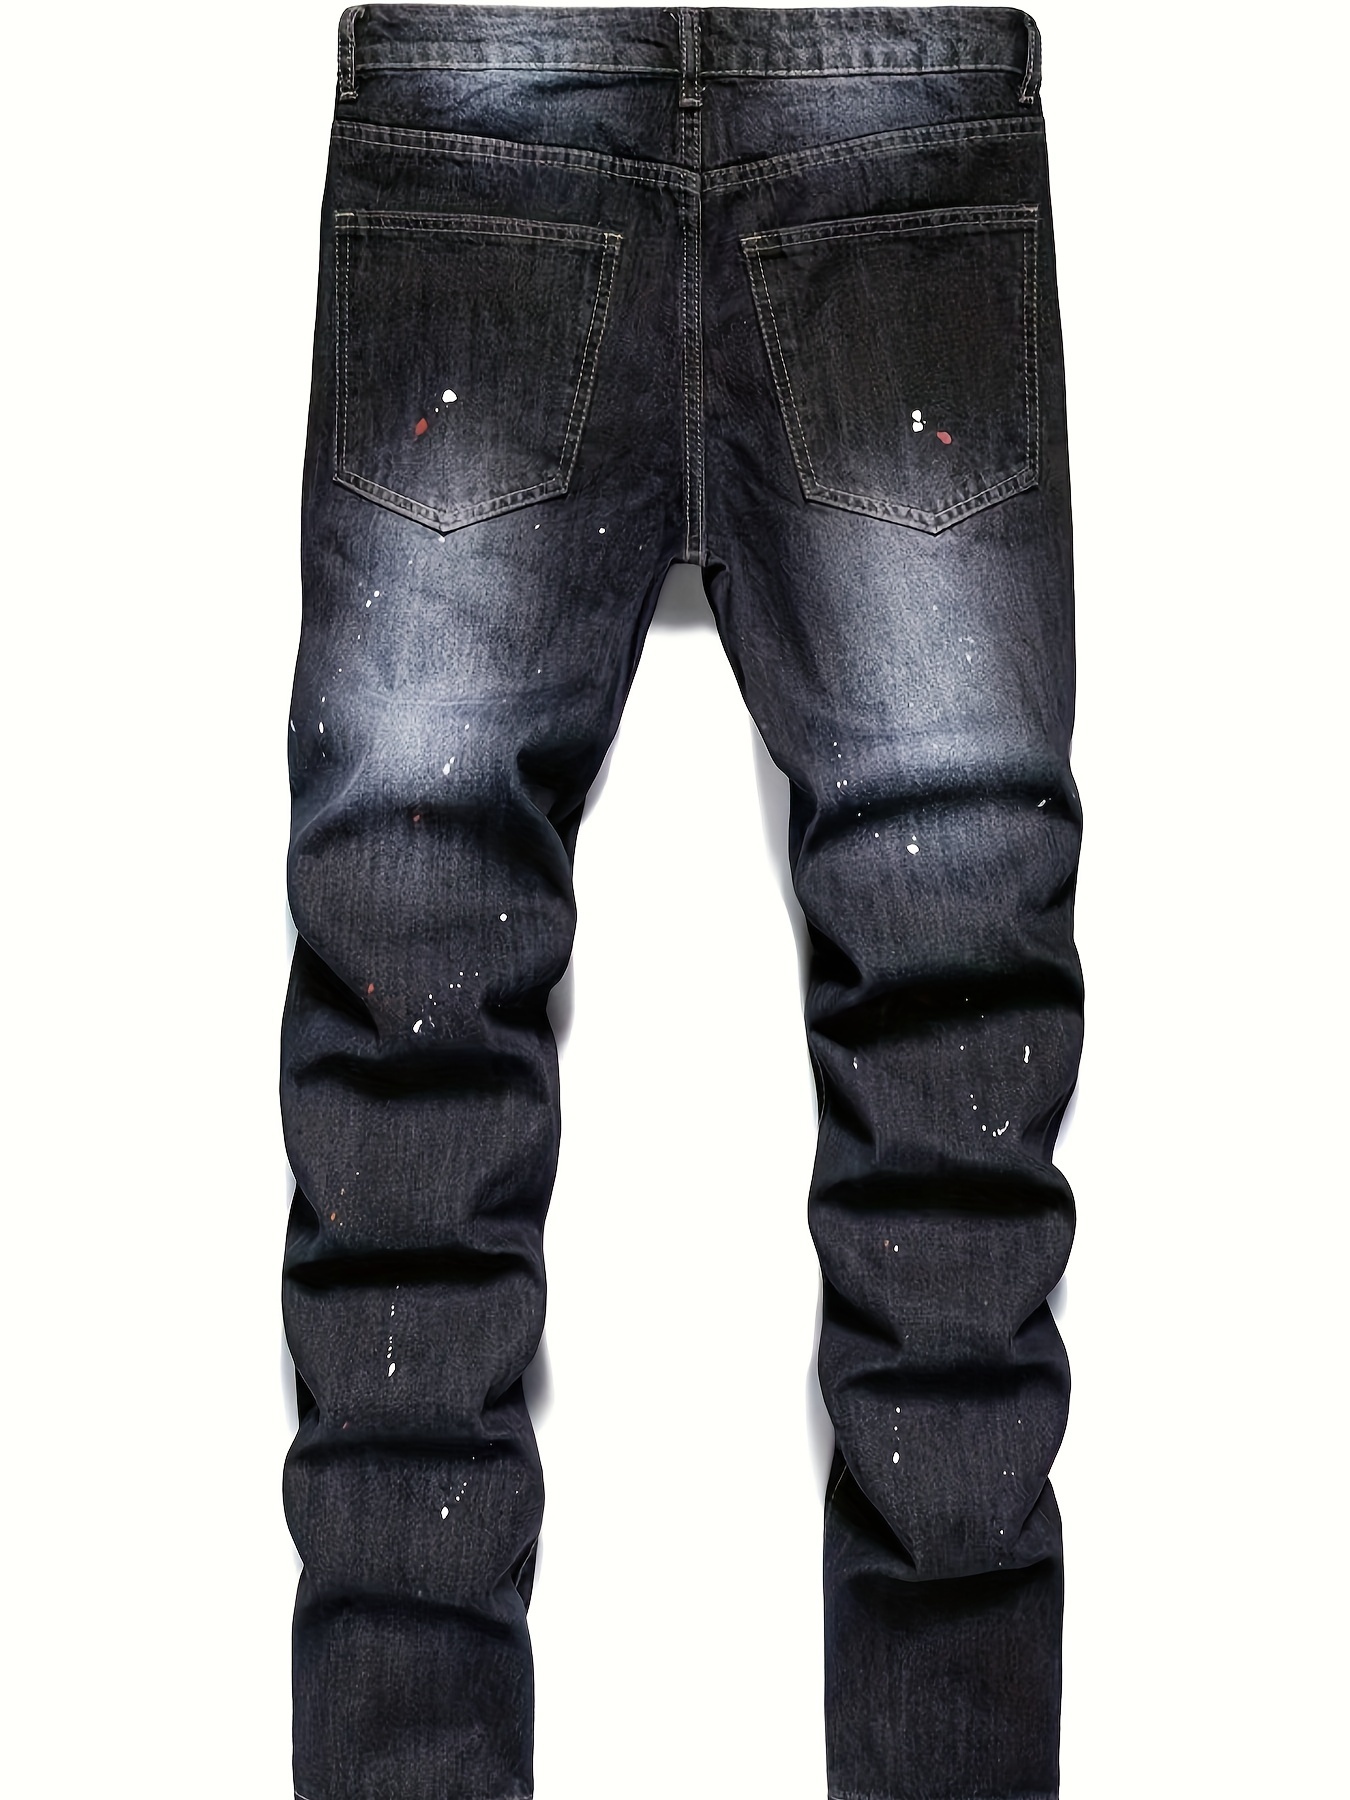 Men's Distressed Black Jeans Skinny Fit Ripped Denim Pants | FREE FAST  SHIPPING